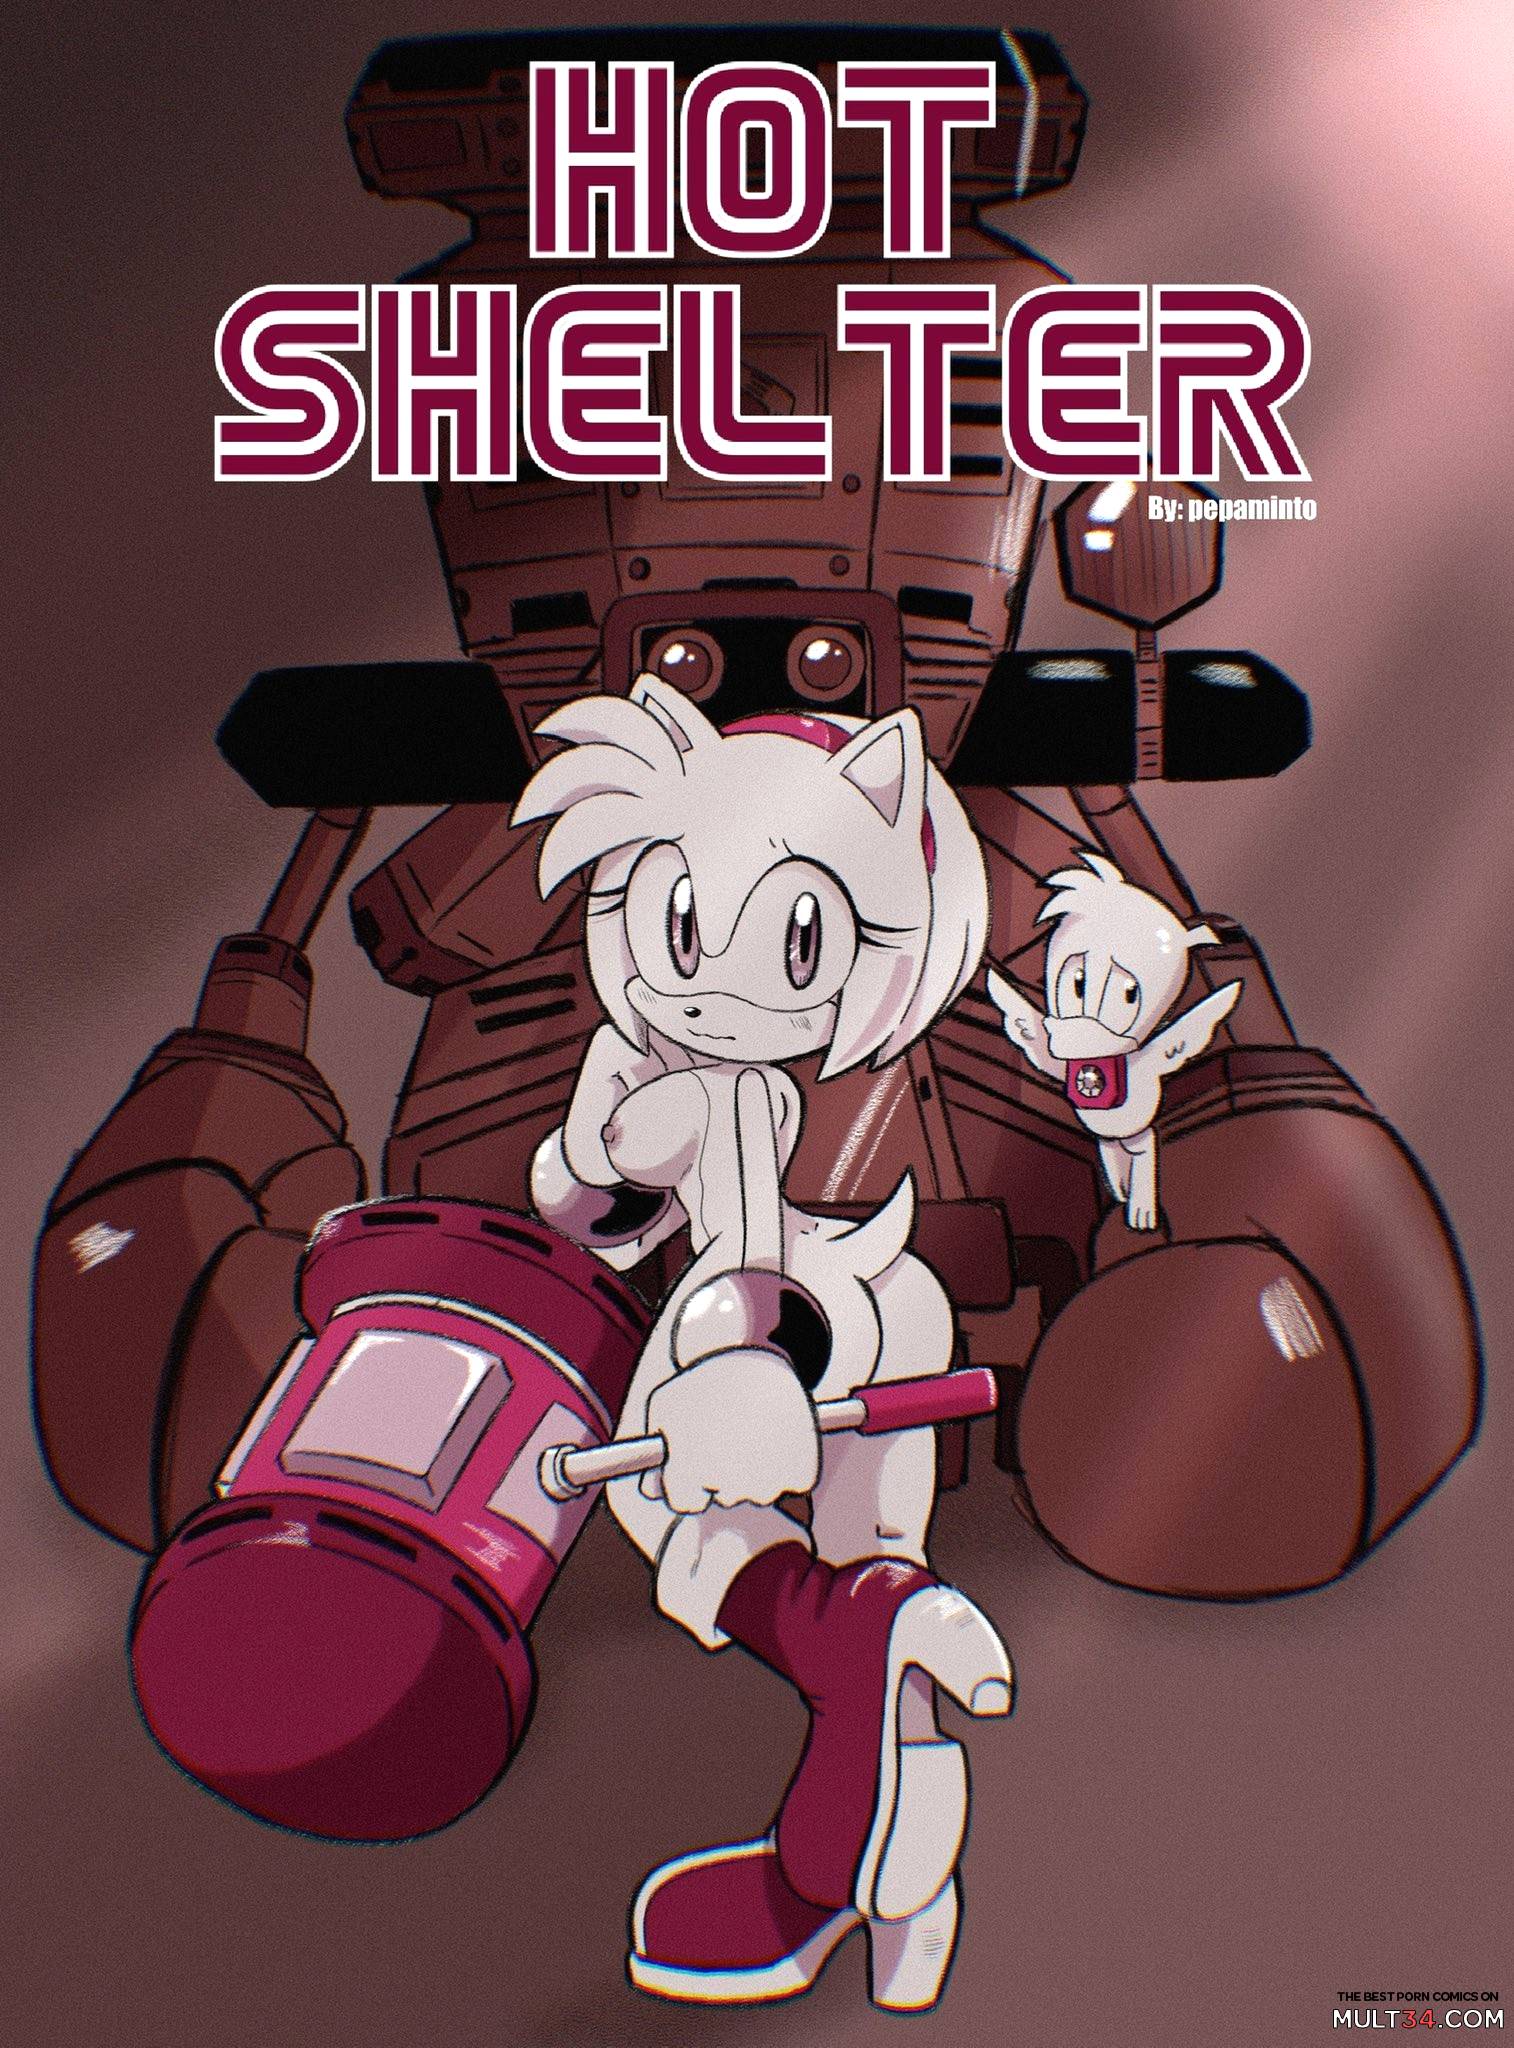 Hot Shelter page 1